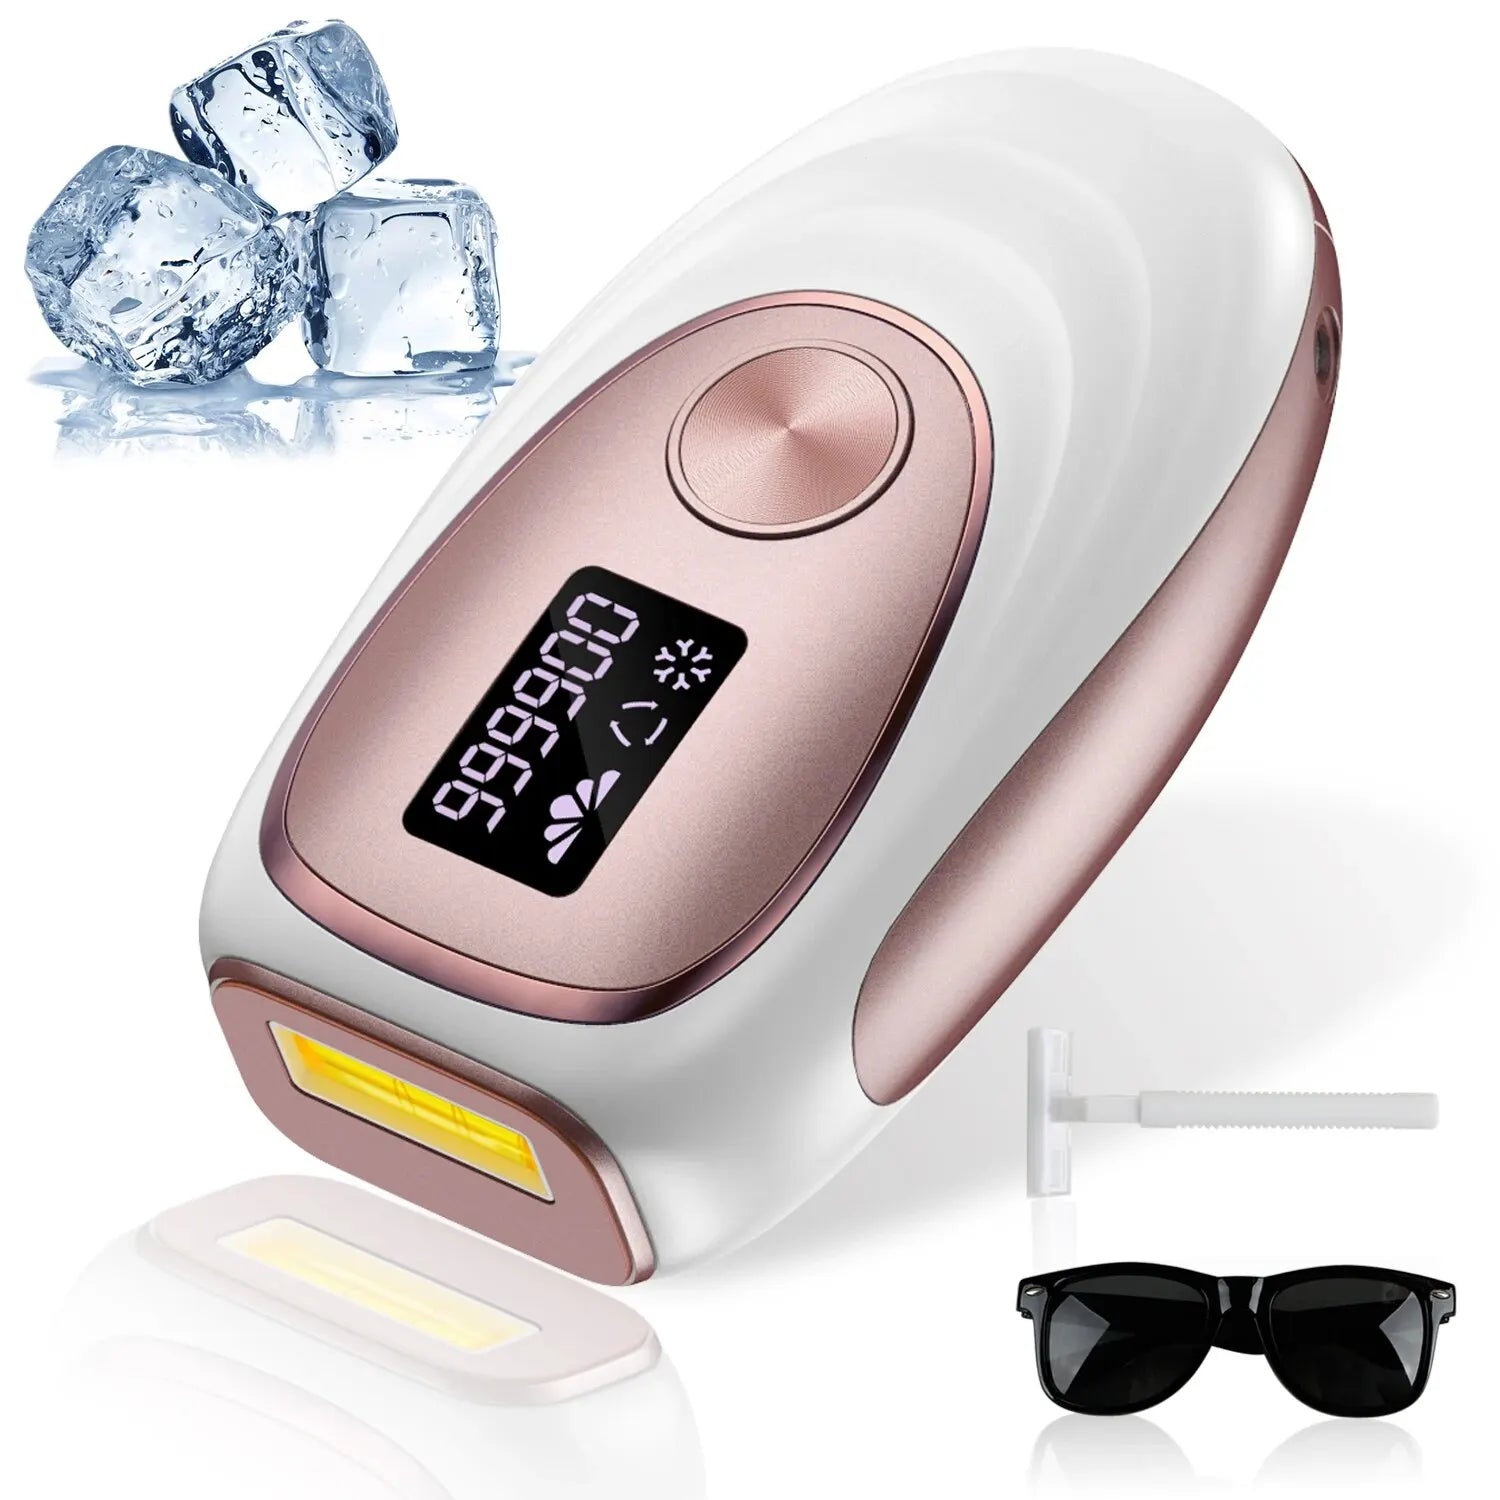 FrostBeam Pro - Advanced IPL Hair Removal